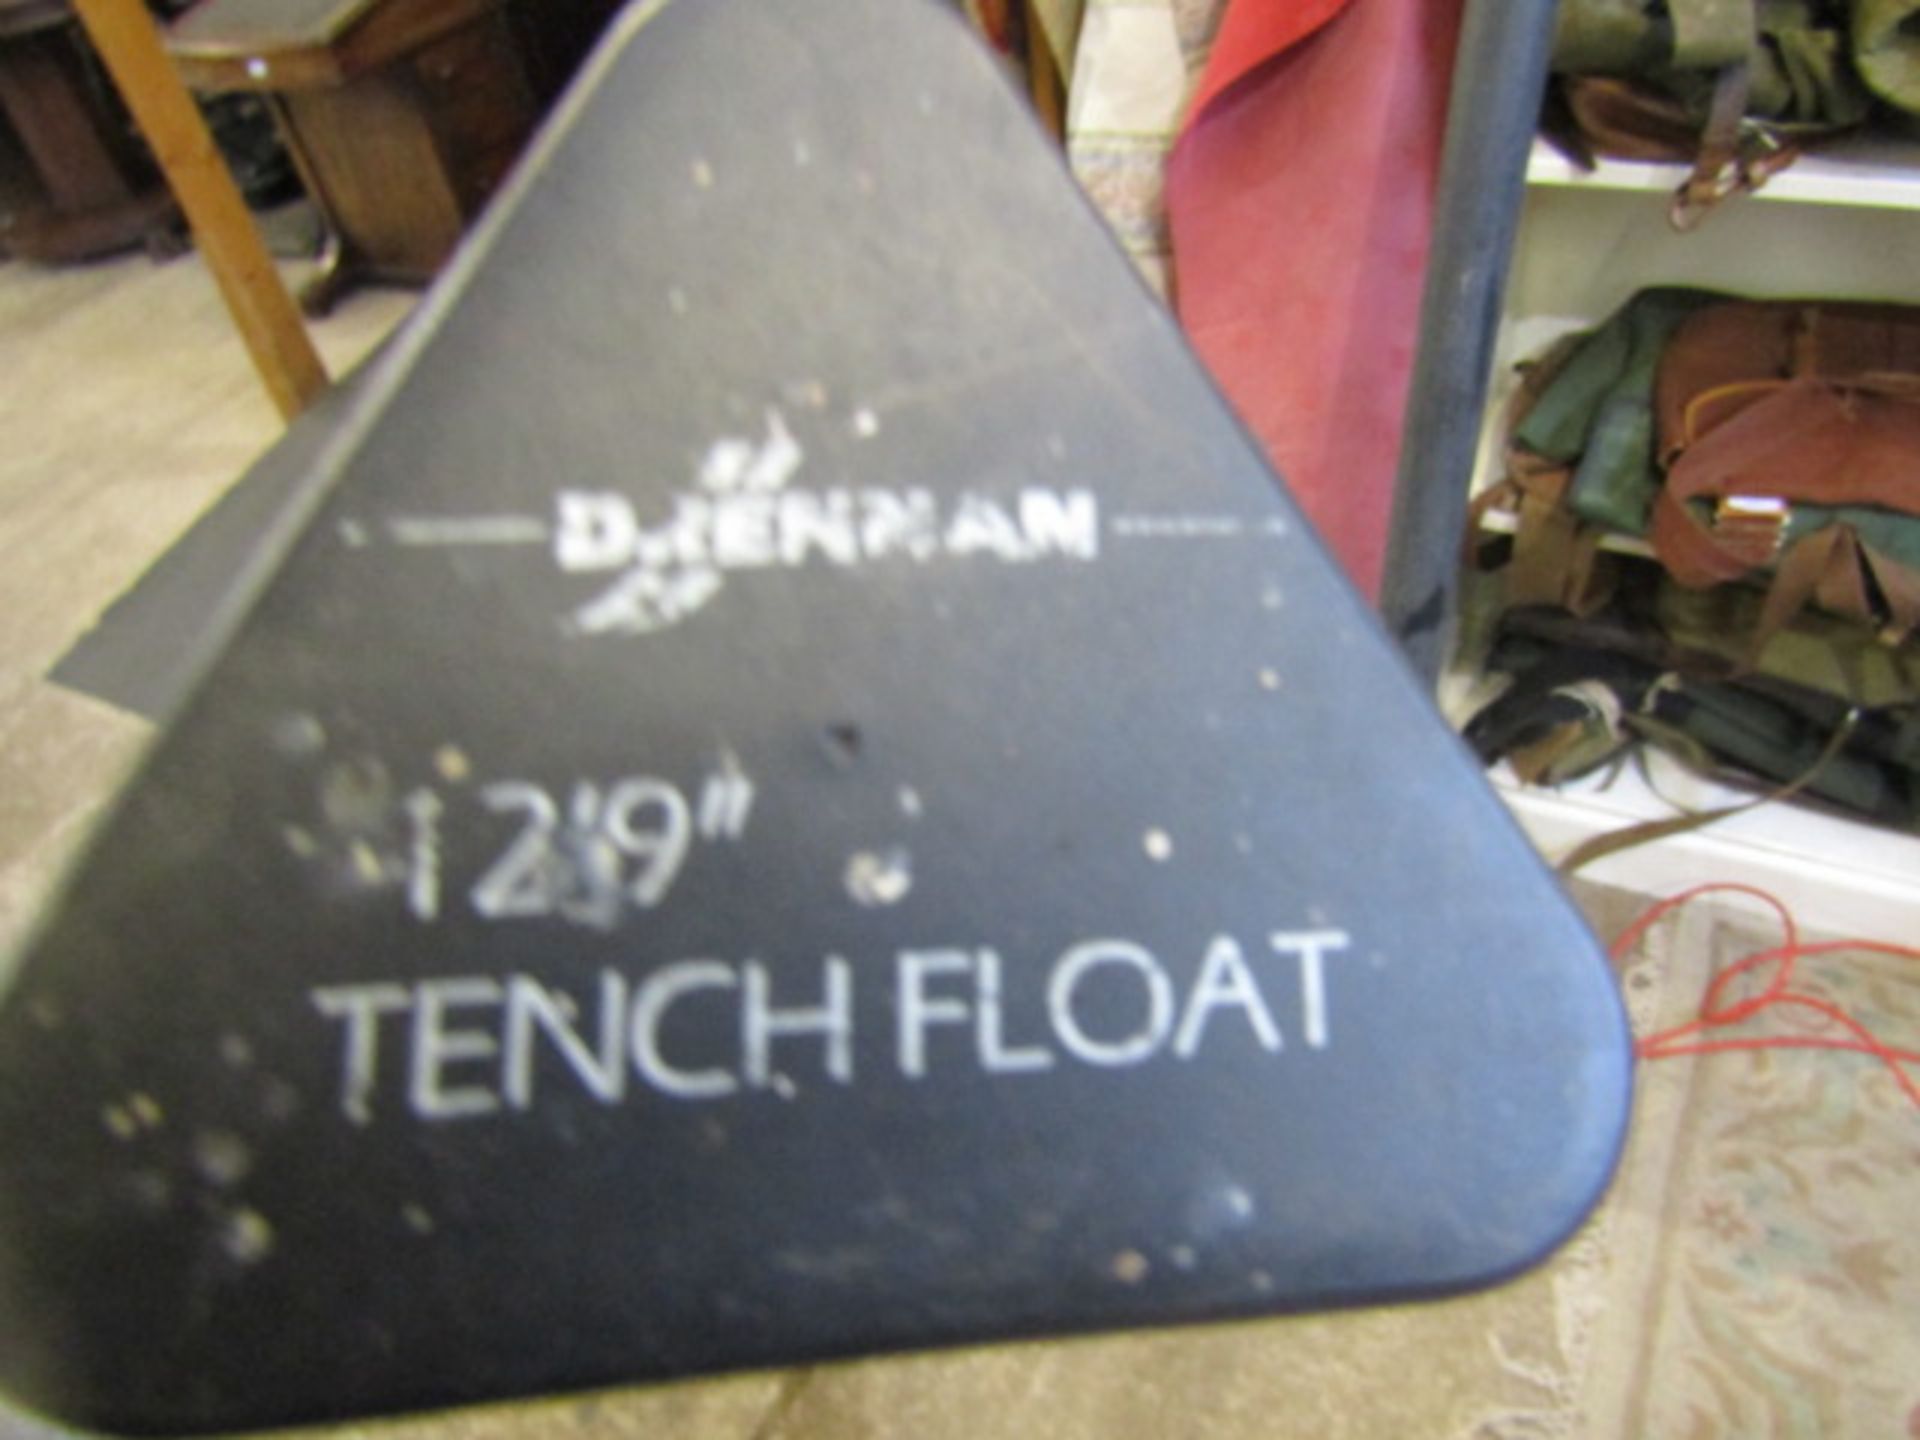 Drennan tench float rod 12' 9" with canvas and hard tube case - Image 8 of 8